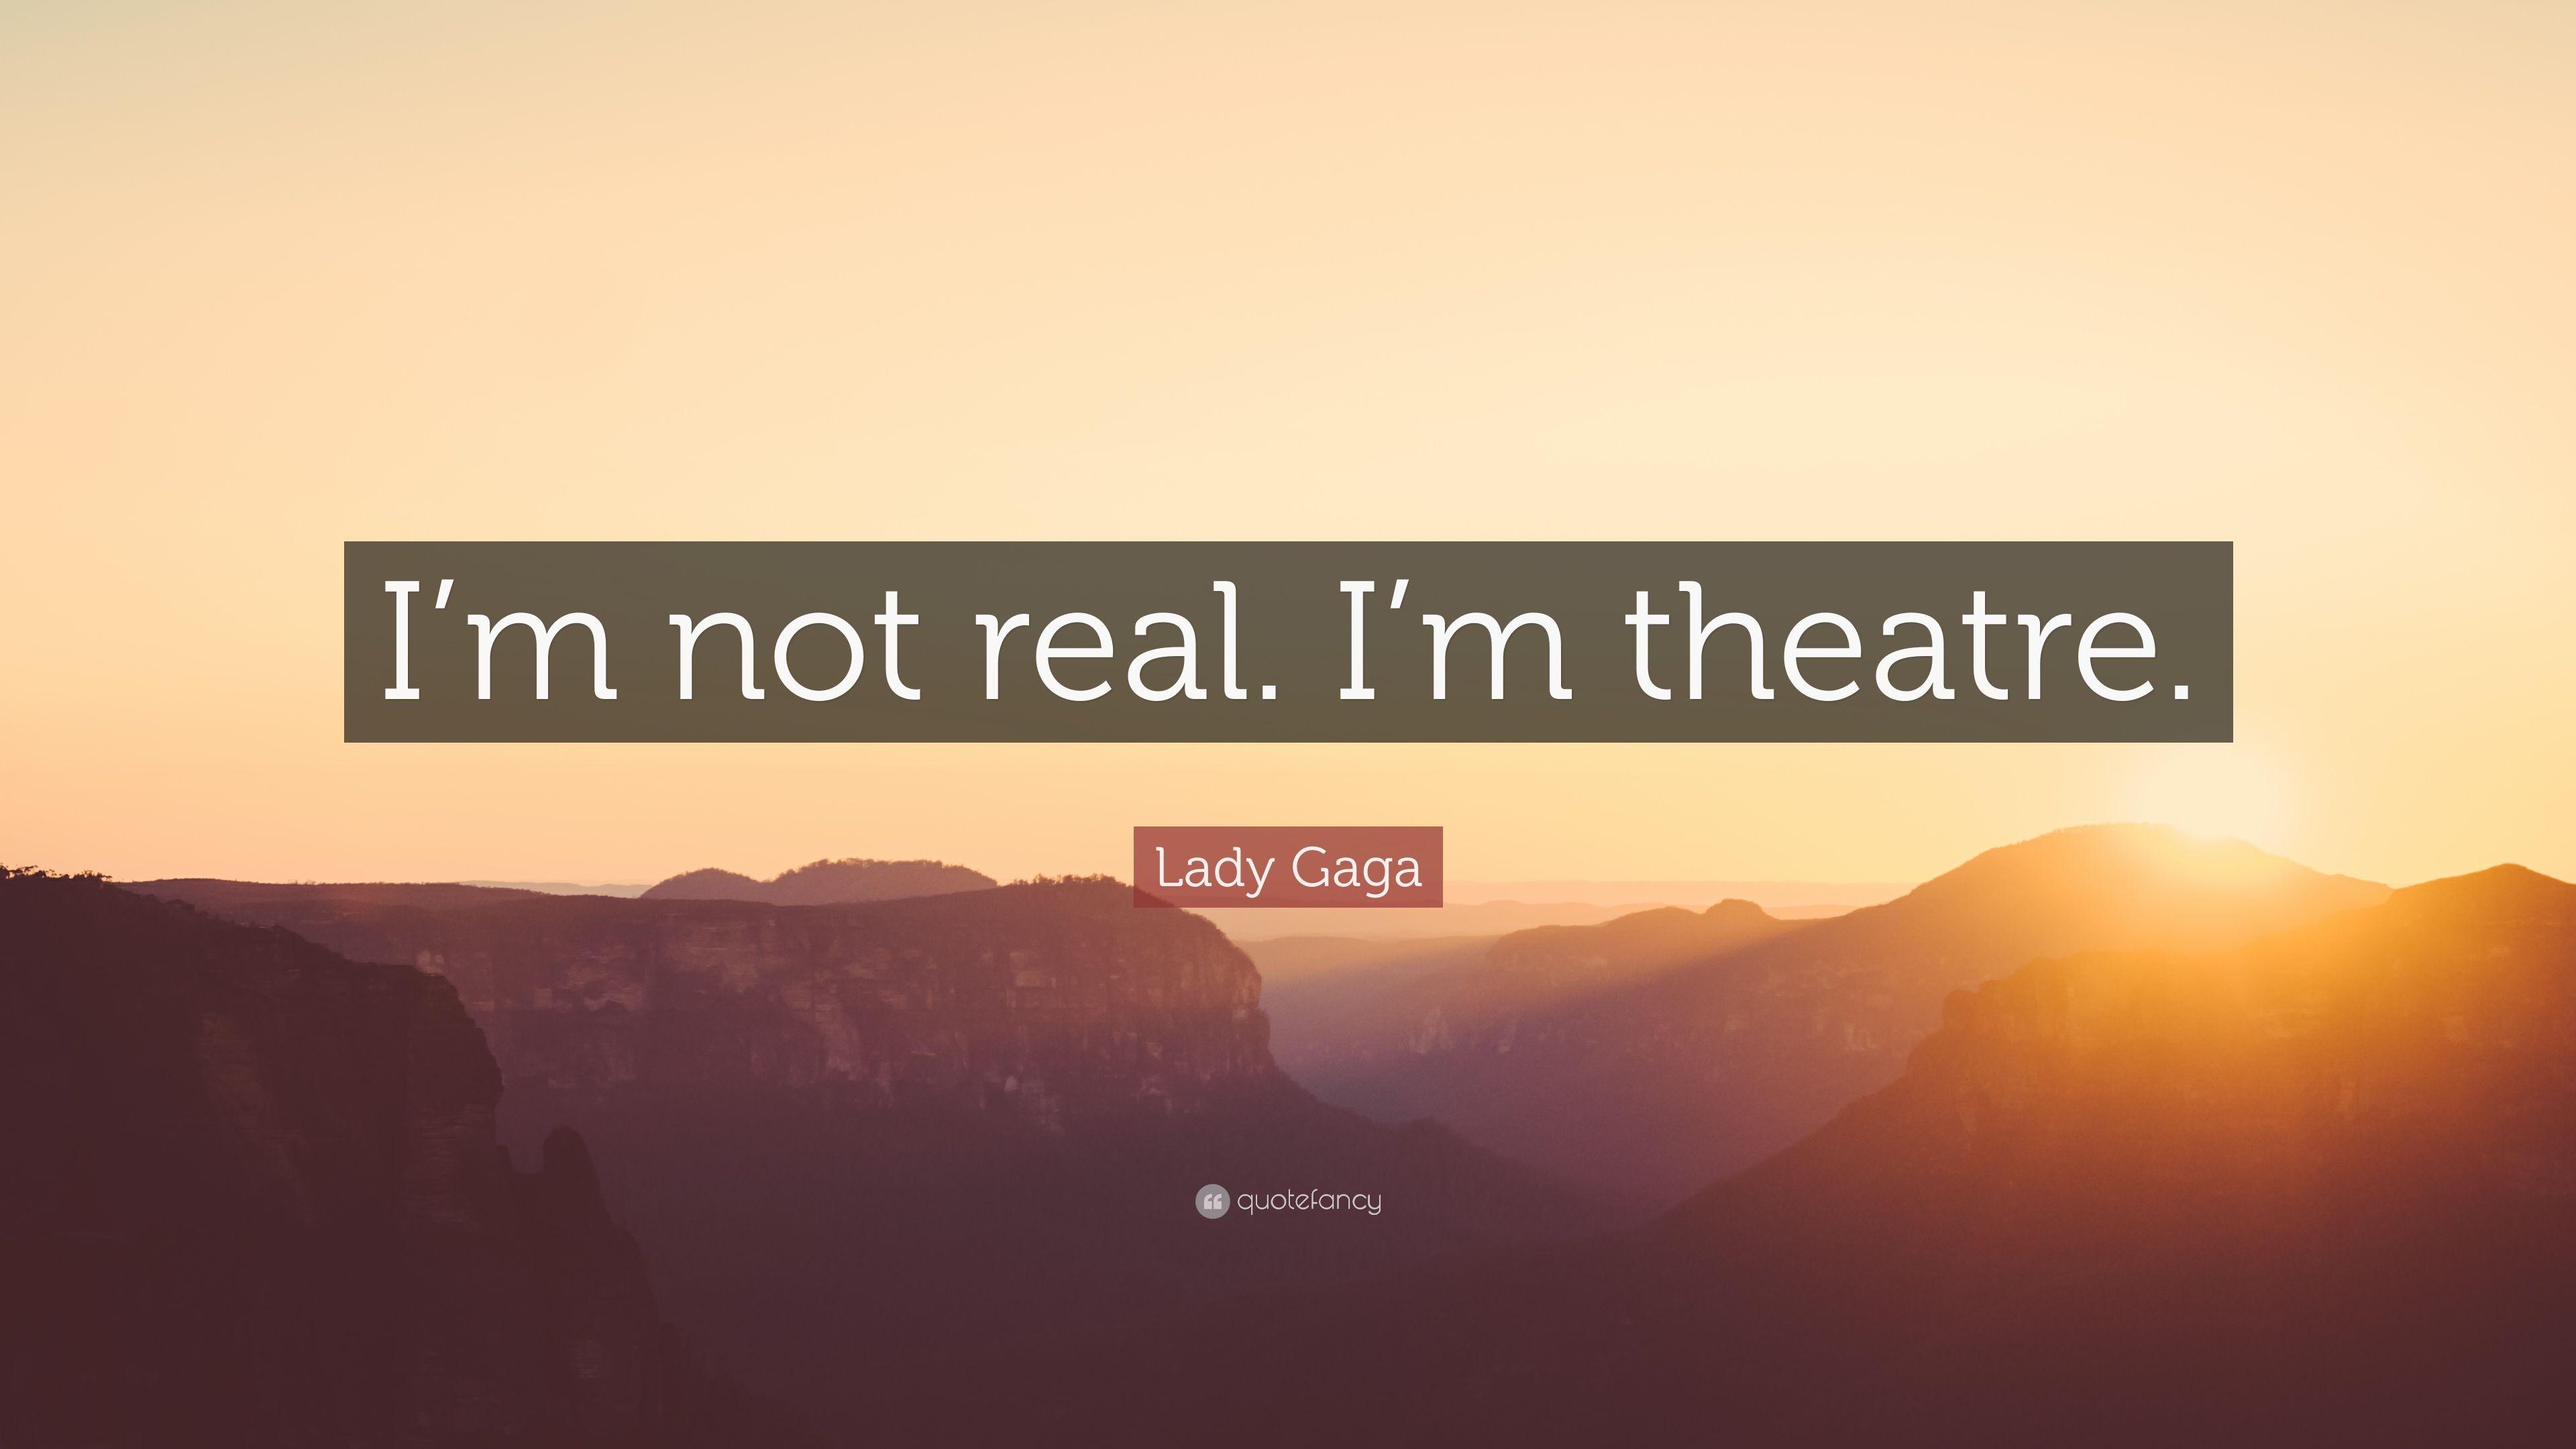 Lady Gaga Quote: “I'm not real. I'm theatre.” 12 wallpaper